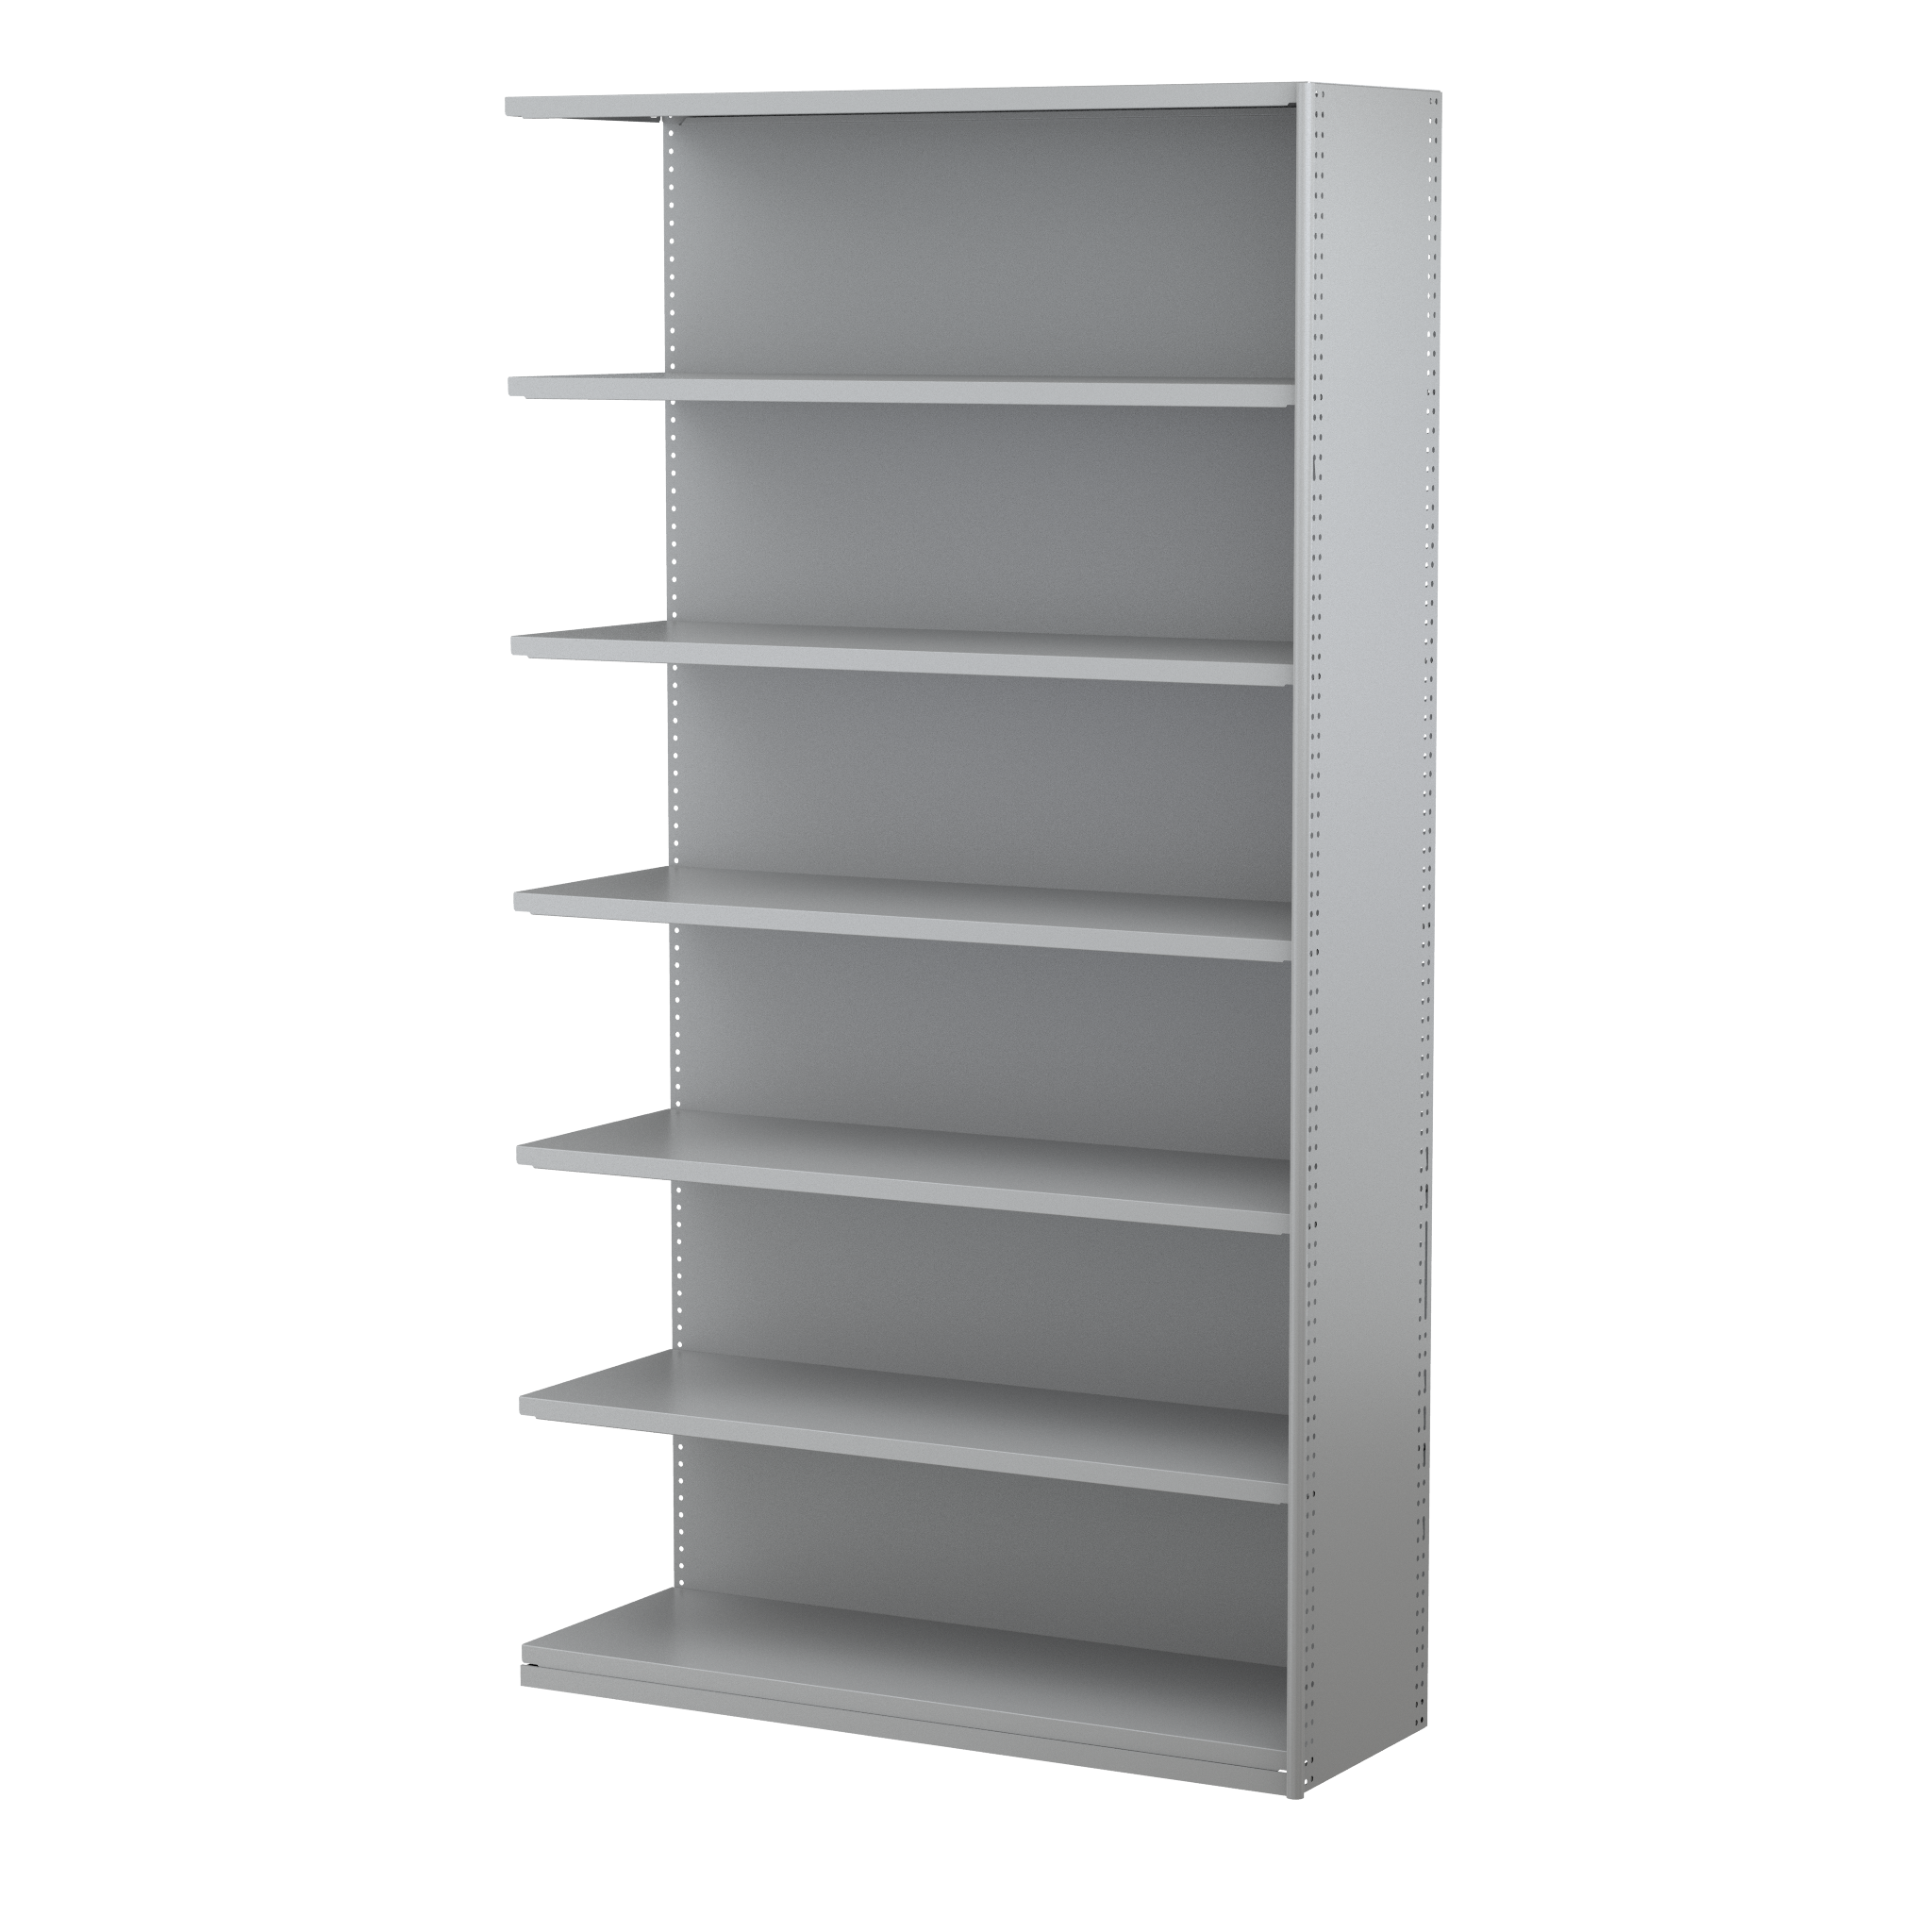 UNIS1200_400_ADD - APC UNI-Shelving 2175H x 1200W x 400D - Add on Bay-CG.png